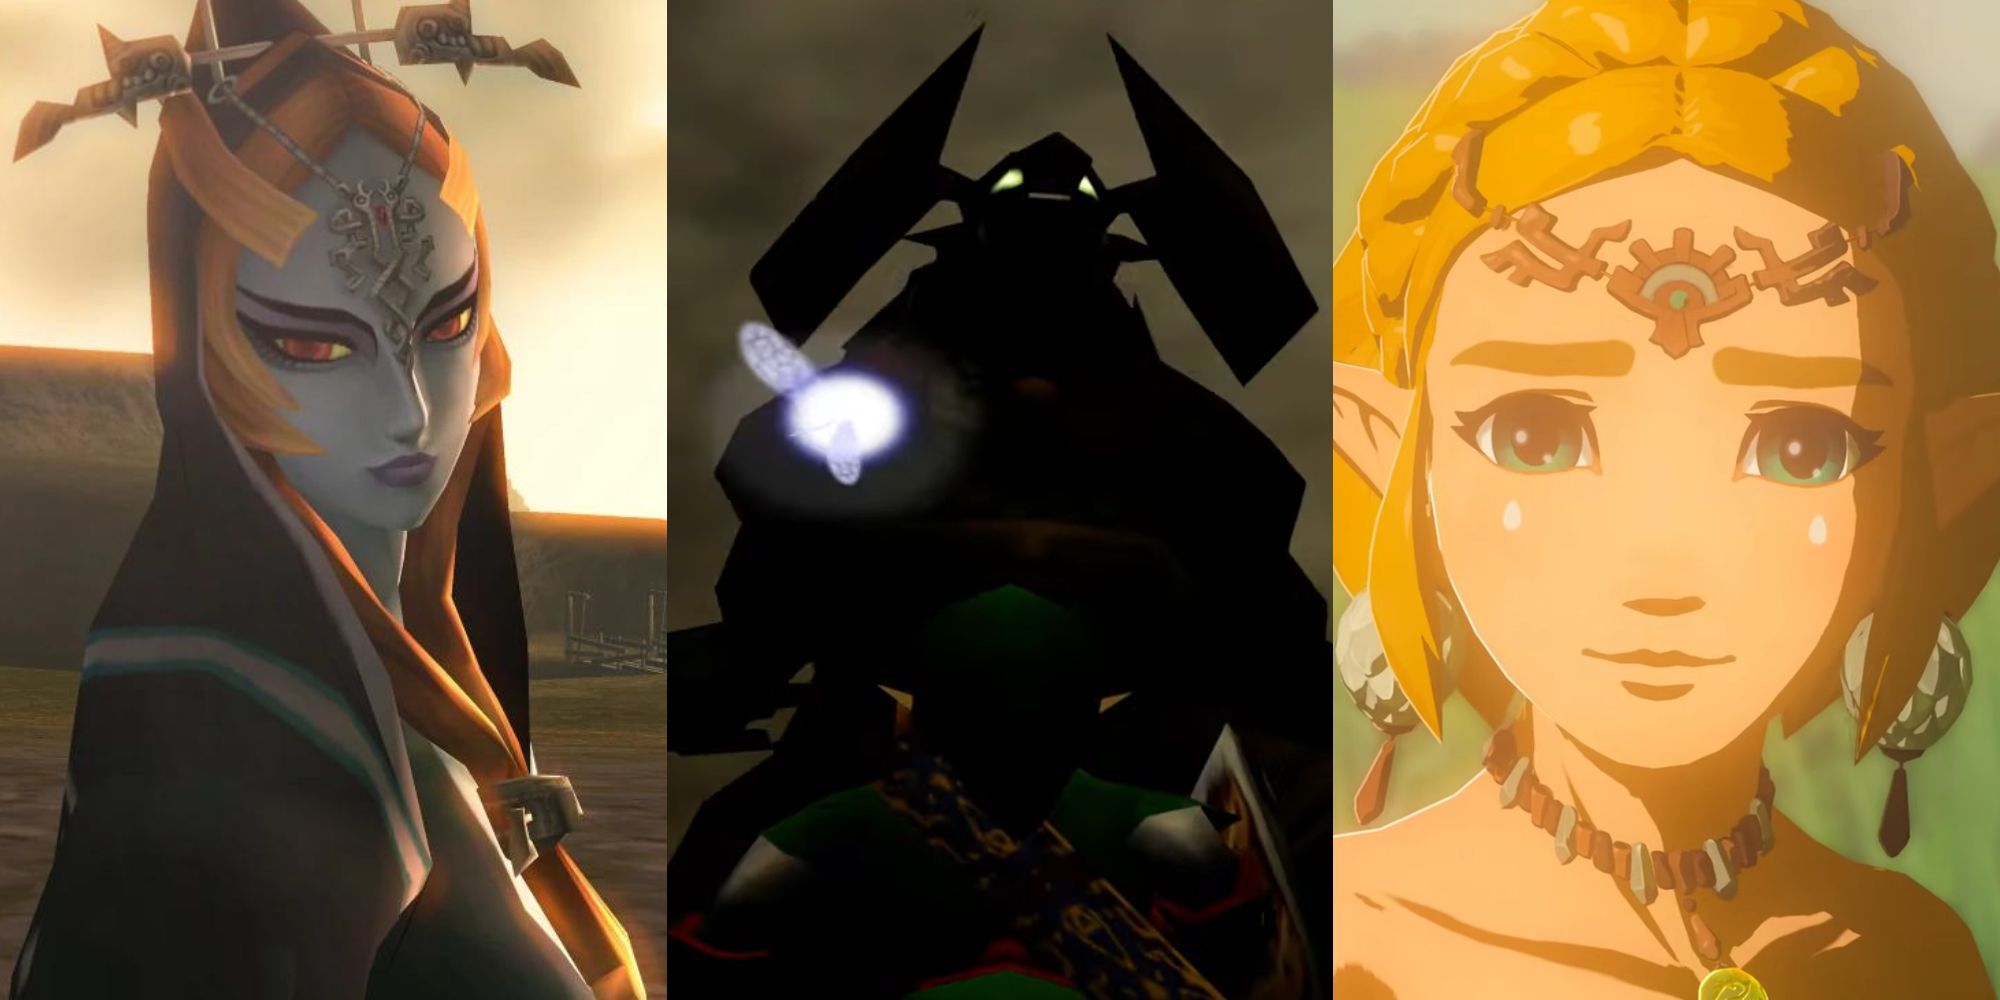 A collage with images of some of the best endings in the Legend of Zelda franchise: Twilight Princess, Ocarina of Time and Tears of the Kingdom.